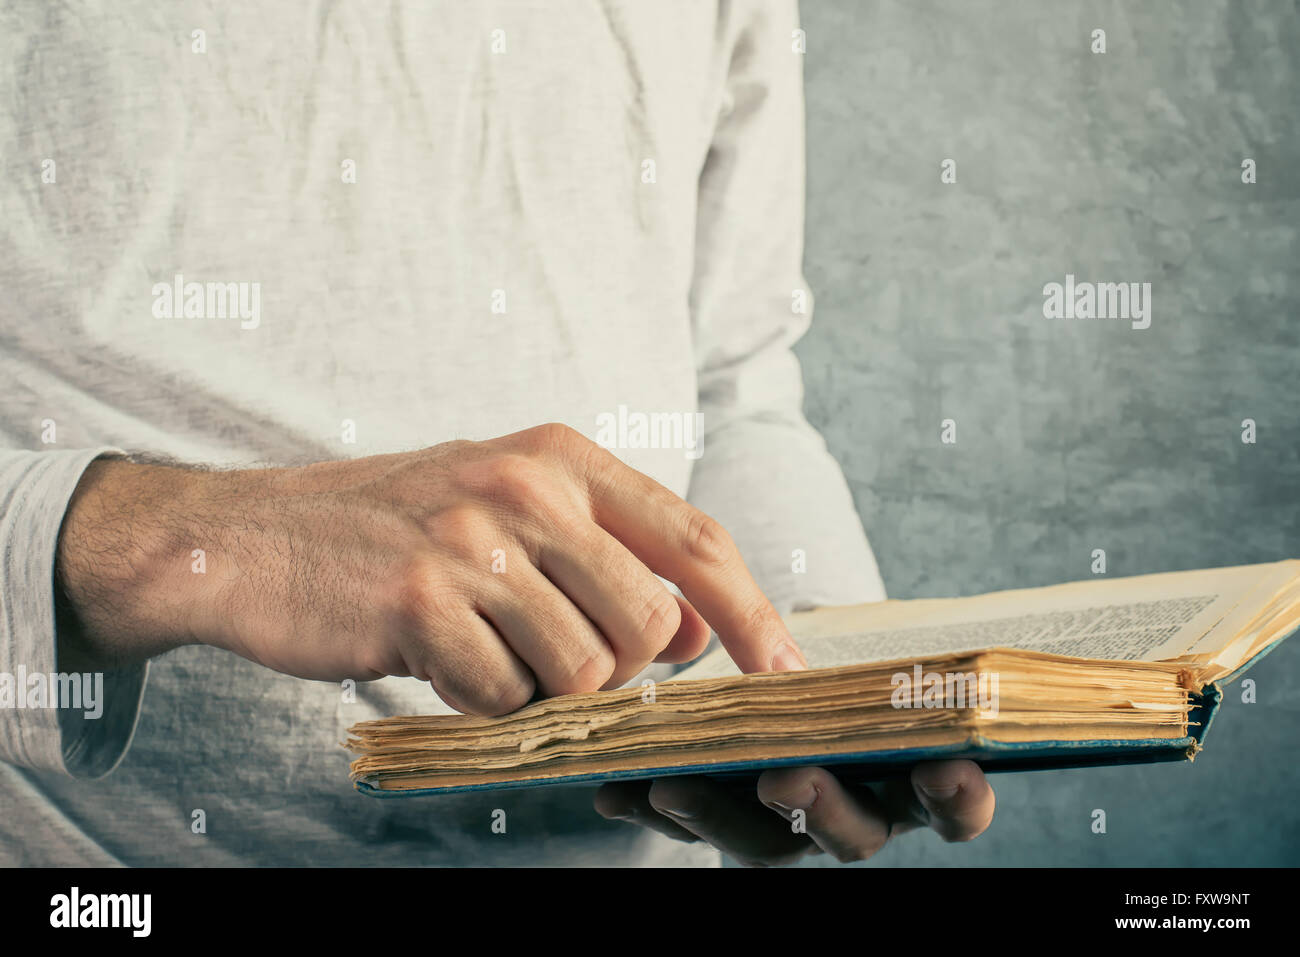 Man reading old book with torn pages, close up of adult male hands holding vintage book. Stock Photo